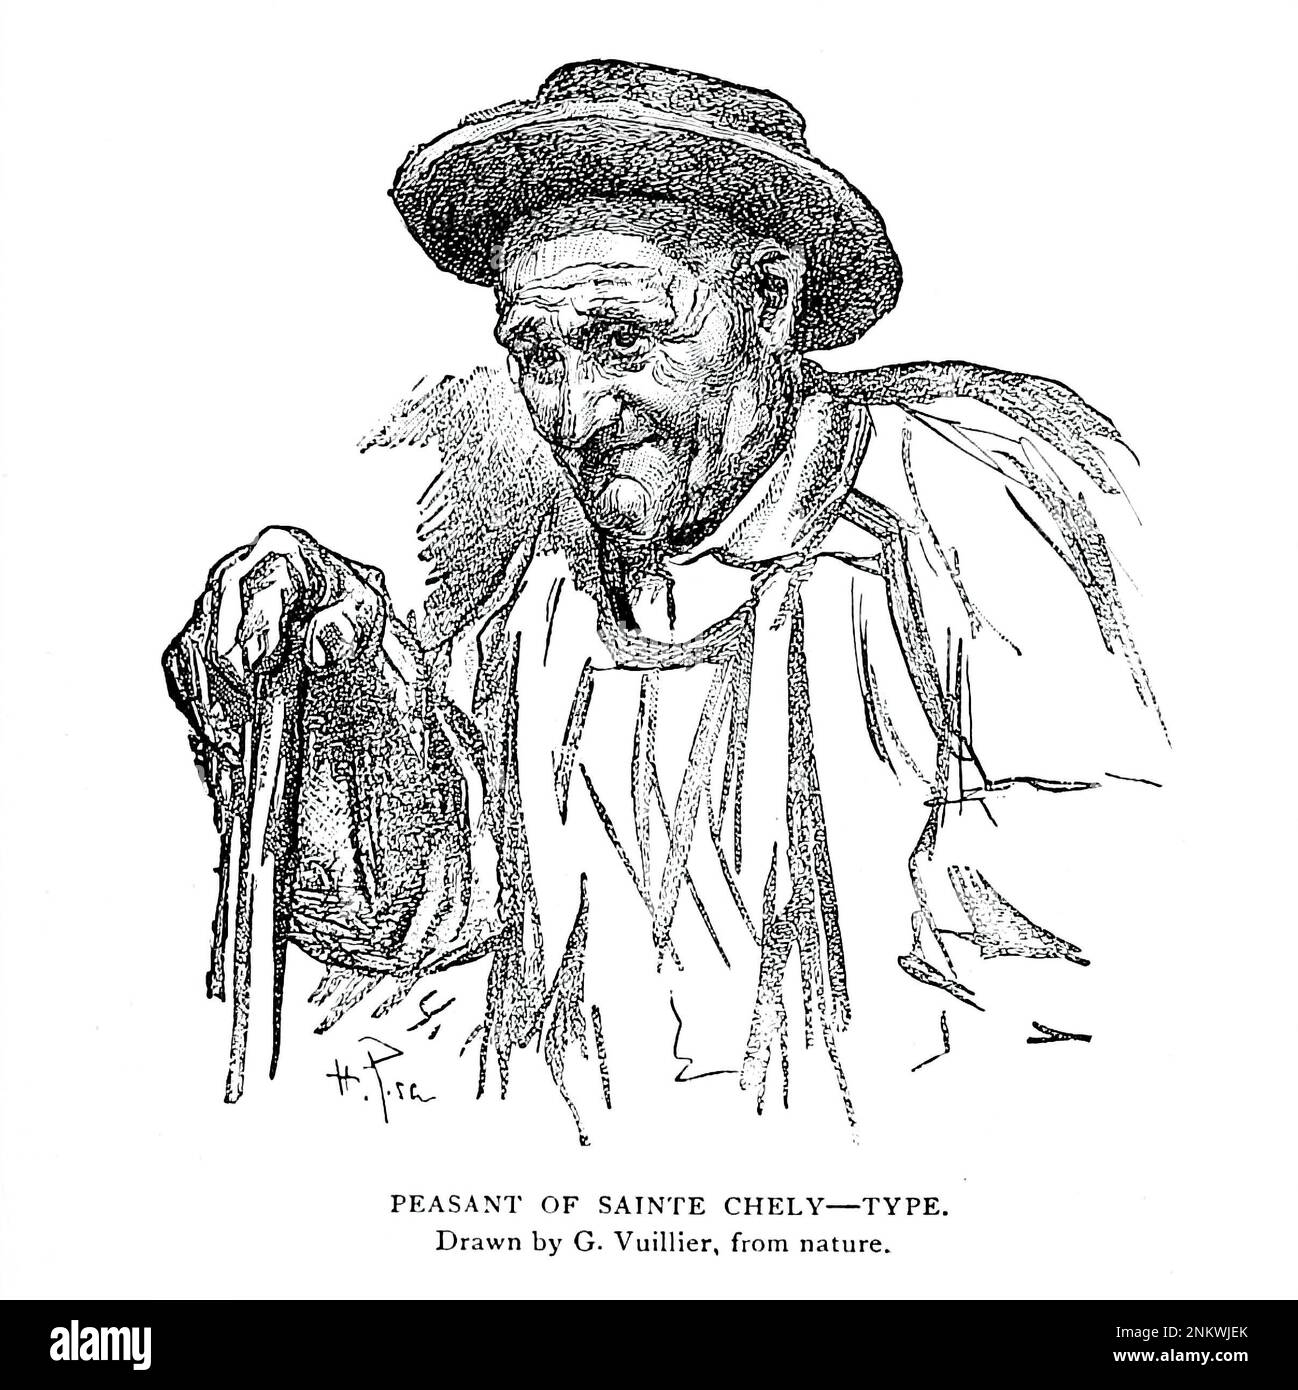 PEASANT OF SAINTE CHELY Drawn by Gaston Vuillier The Brown Races Malayo-Mongoloids Iberians and Basques from Cyclopedia universal history : embracing the most complete and recent presentation of the subject in two principal parts or divisions of more than six thousand pages by John Clark Ridpath, 1840-1900 Publication date 1895 Publisher Boston : Balch Bros. Volume 6 History of Man and Mankind Stock Photo